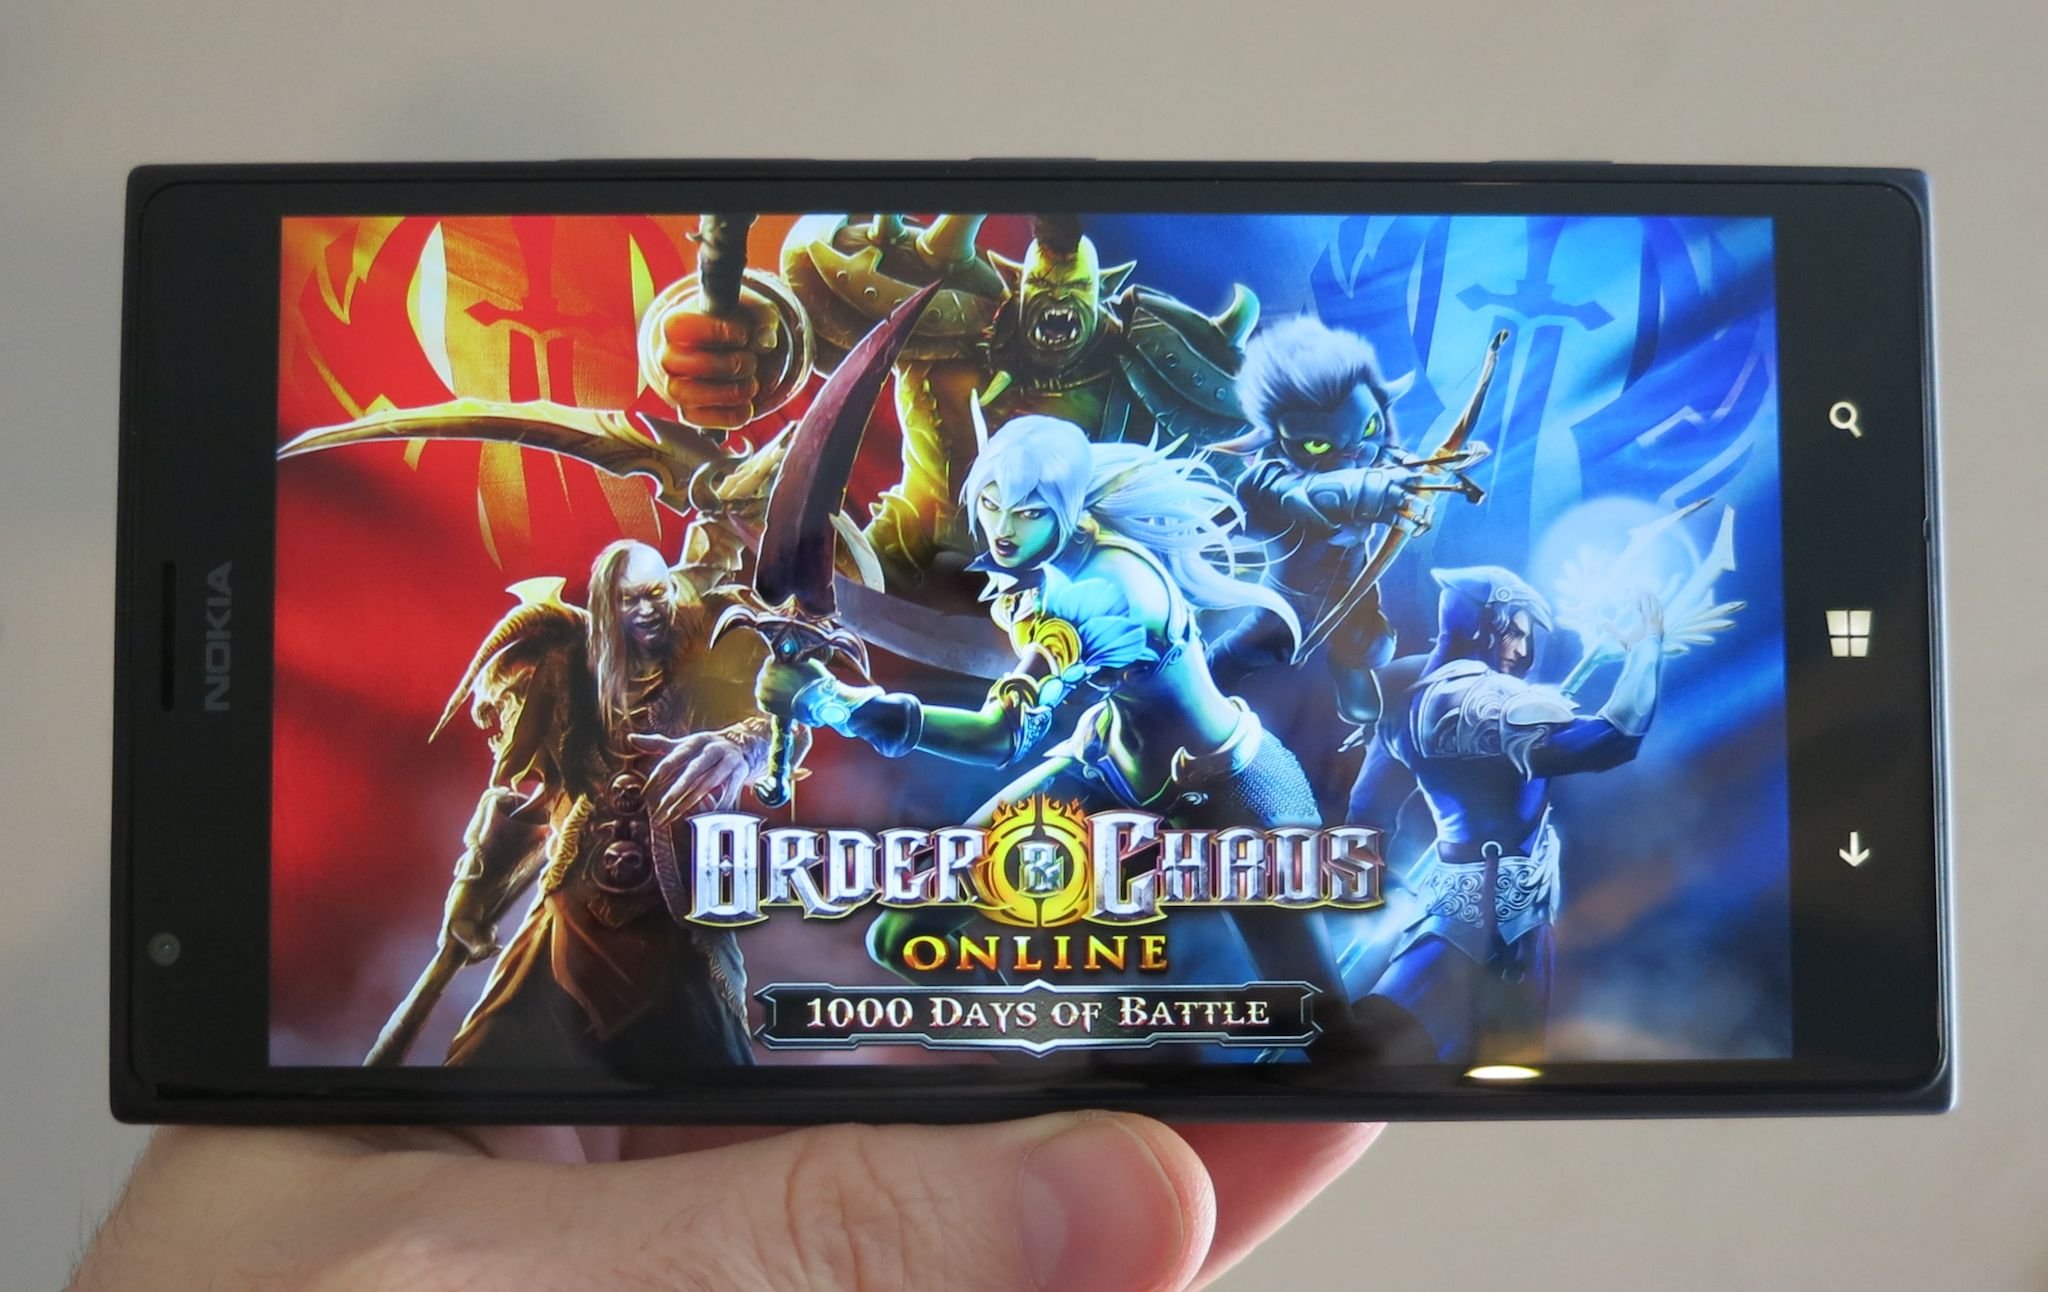 Order & Chaos Online gets new features and goes free on Windows Phone